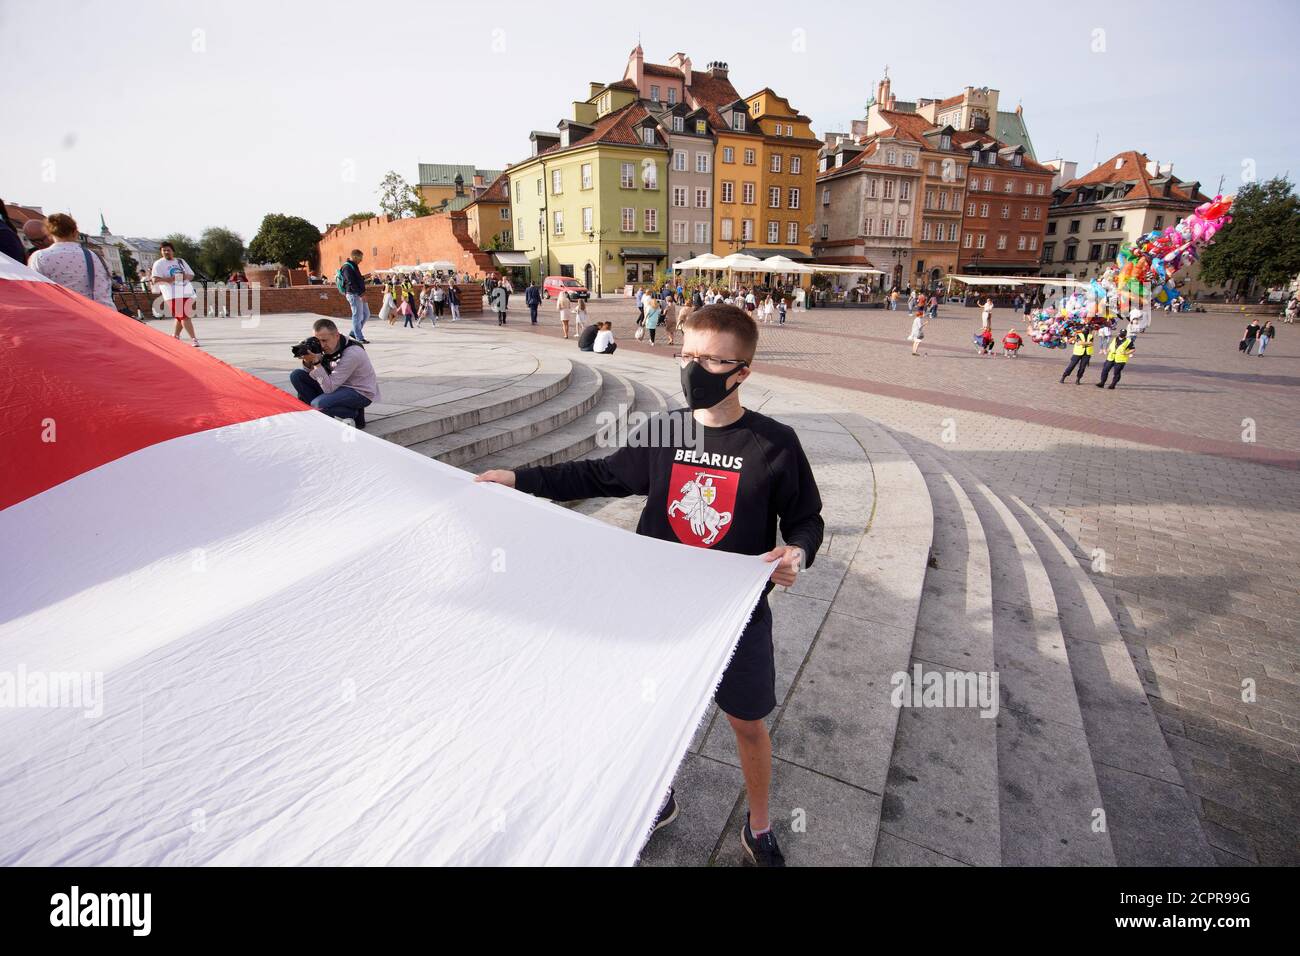 A man with a Pogon symbol on his sweater holds a large, Belarusian White-Red-White flag in Warsaw, Poland on September 19, 2020. Several dozen people, Stock Photo